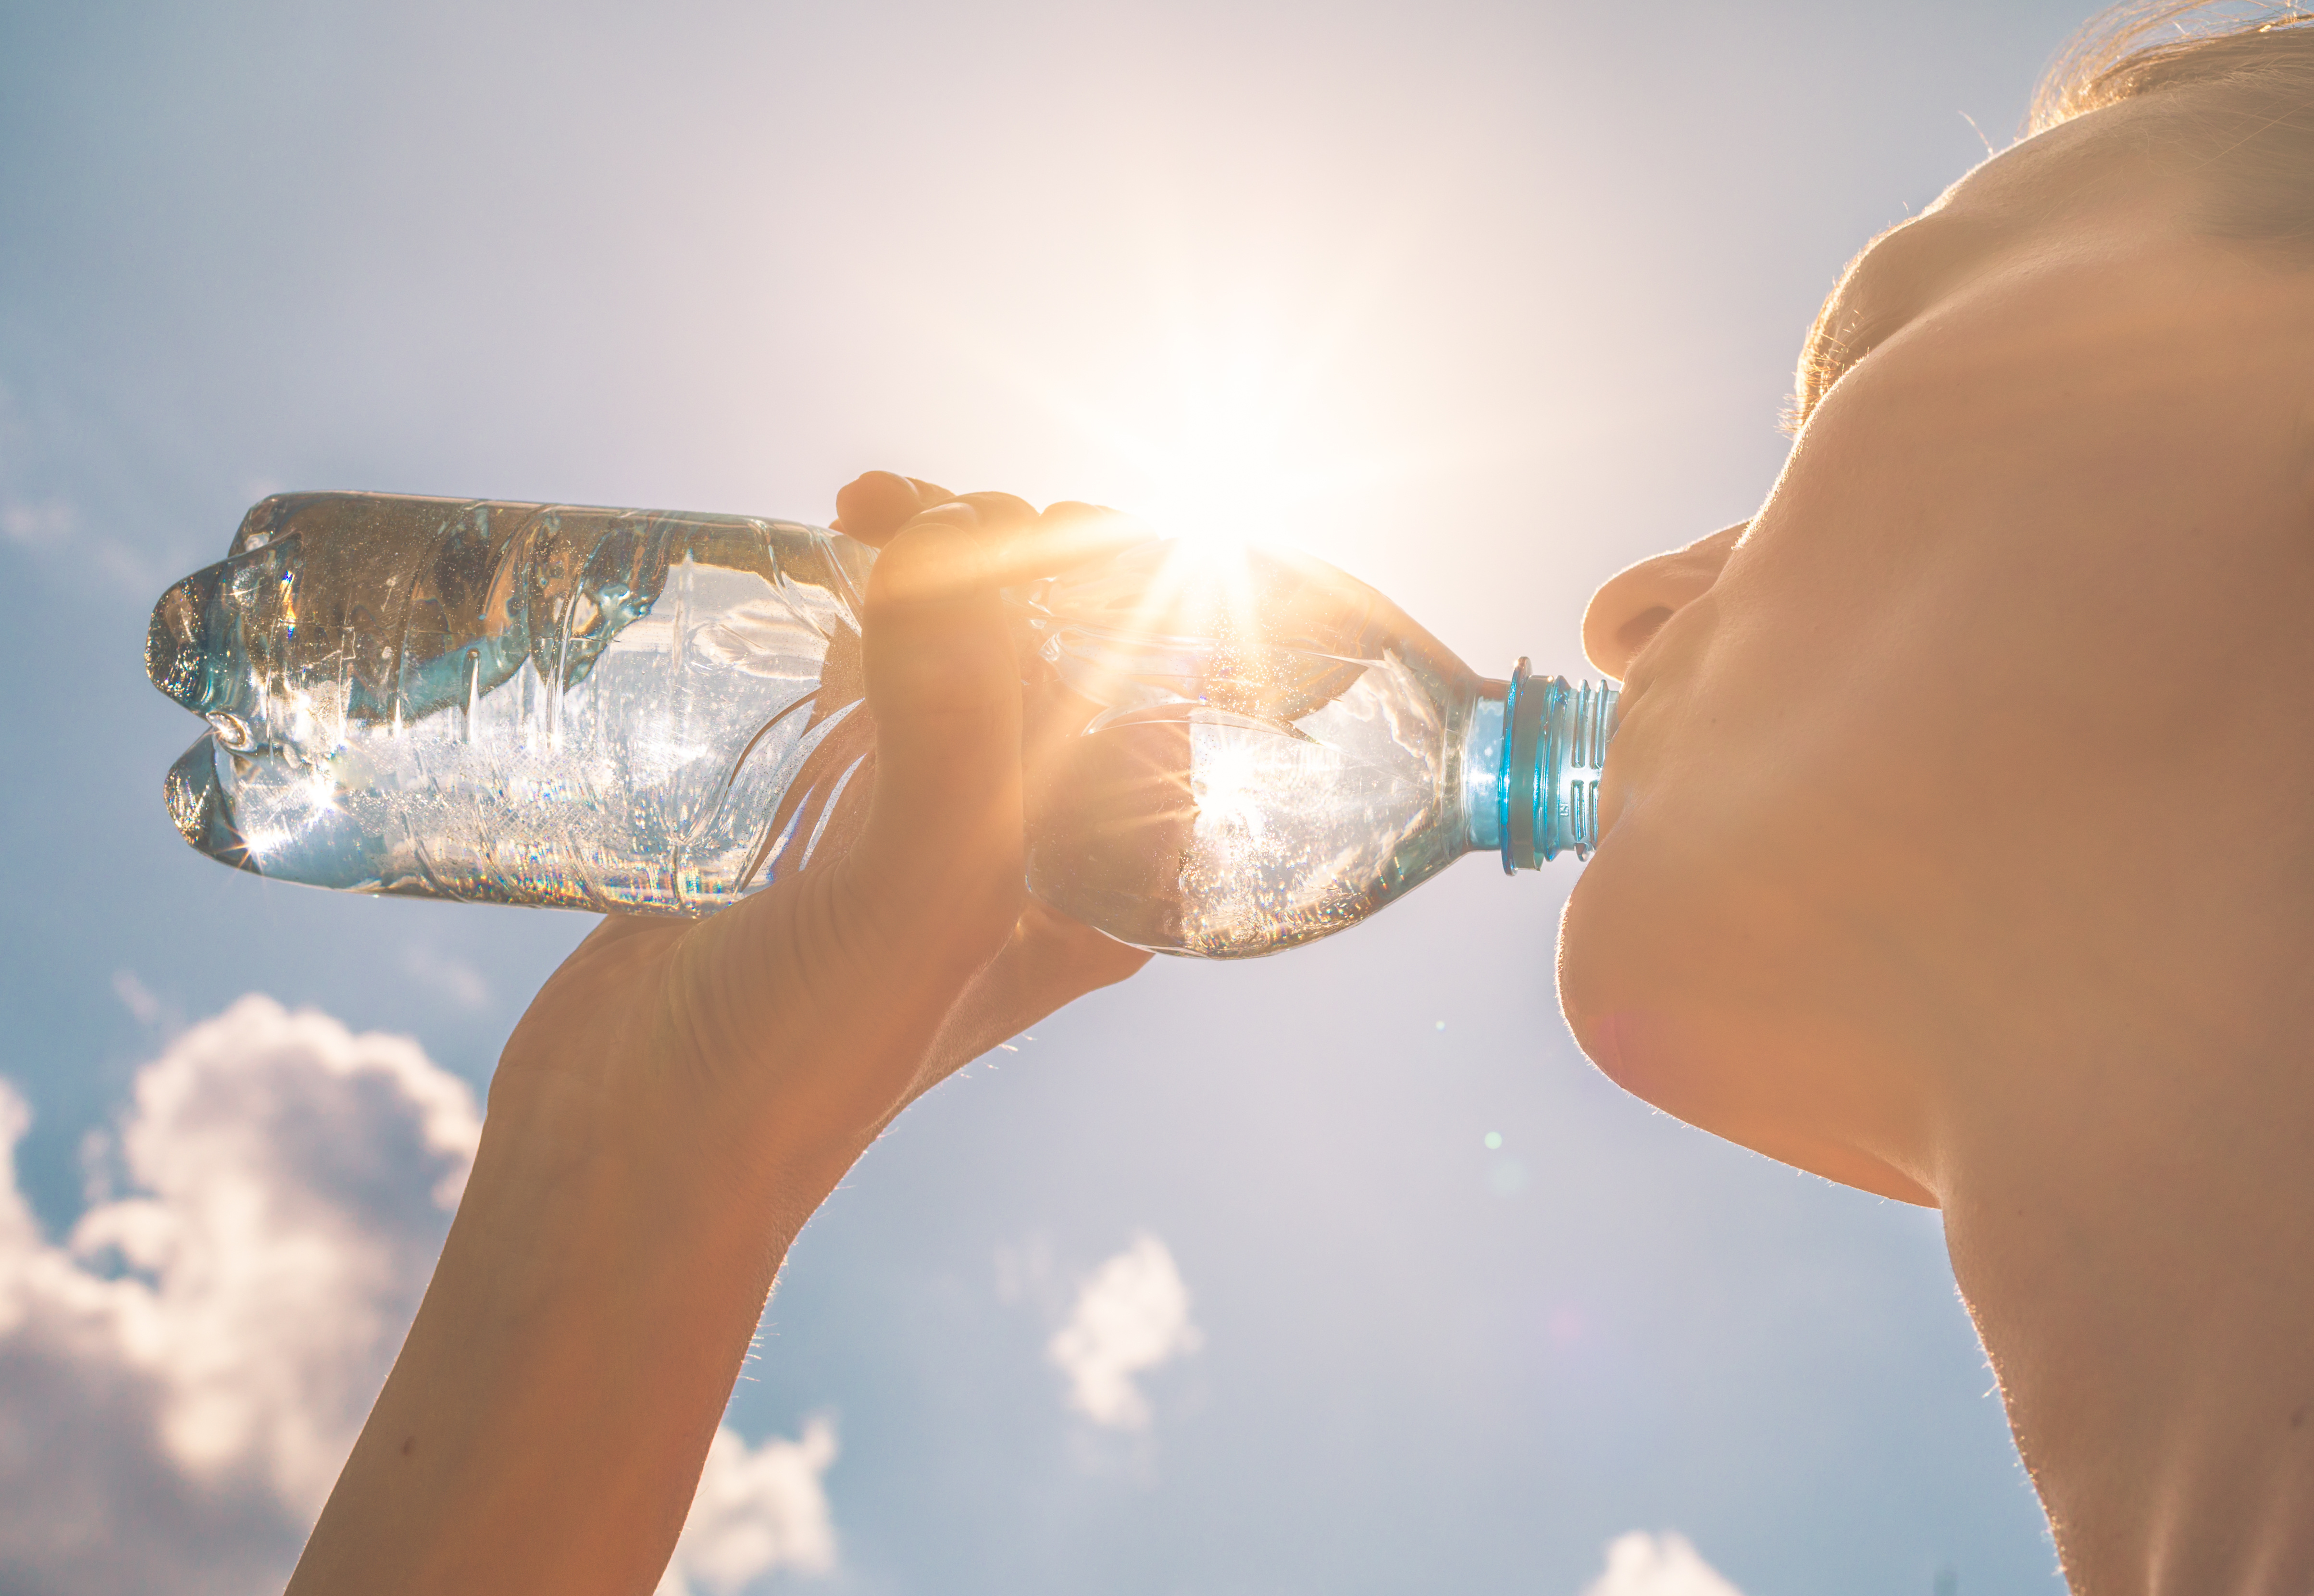 How do I know if I am suffering from Dehydration?